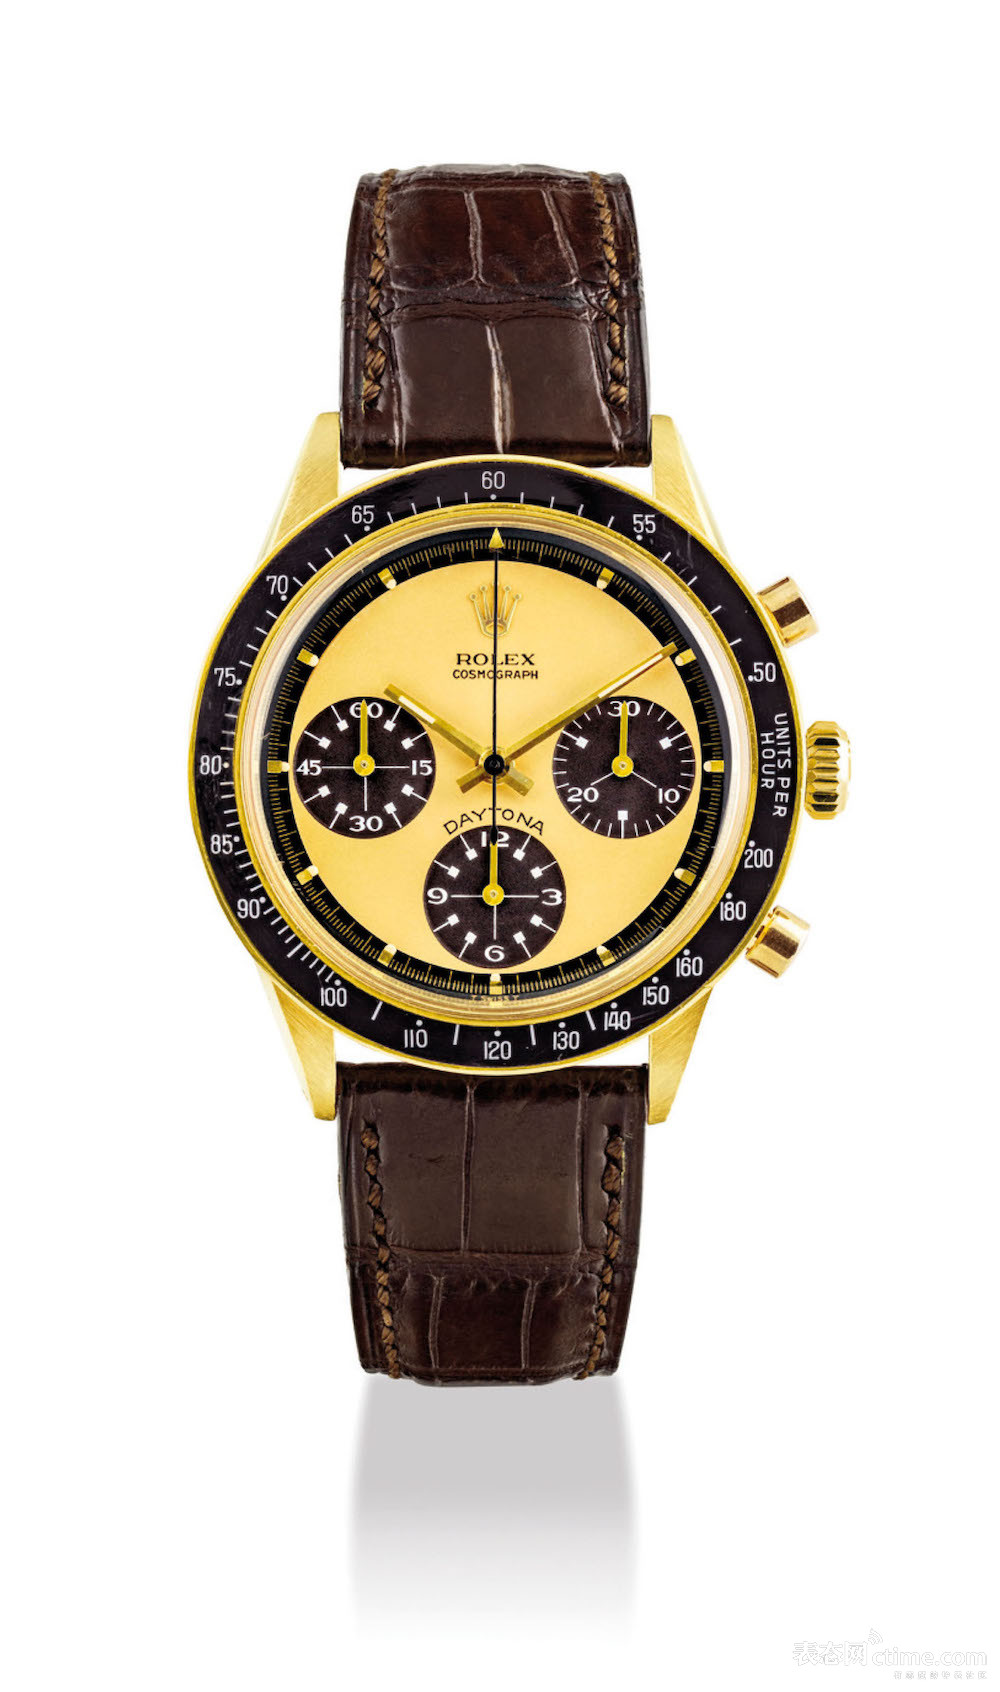 2018_HGK_16128_2534_000(rolex_an_exceptionally_rare_and_very_fine_18k_gold_chronograph_wristwa).jpg